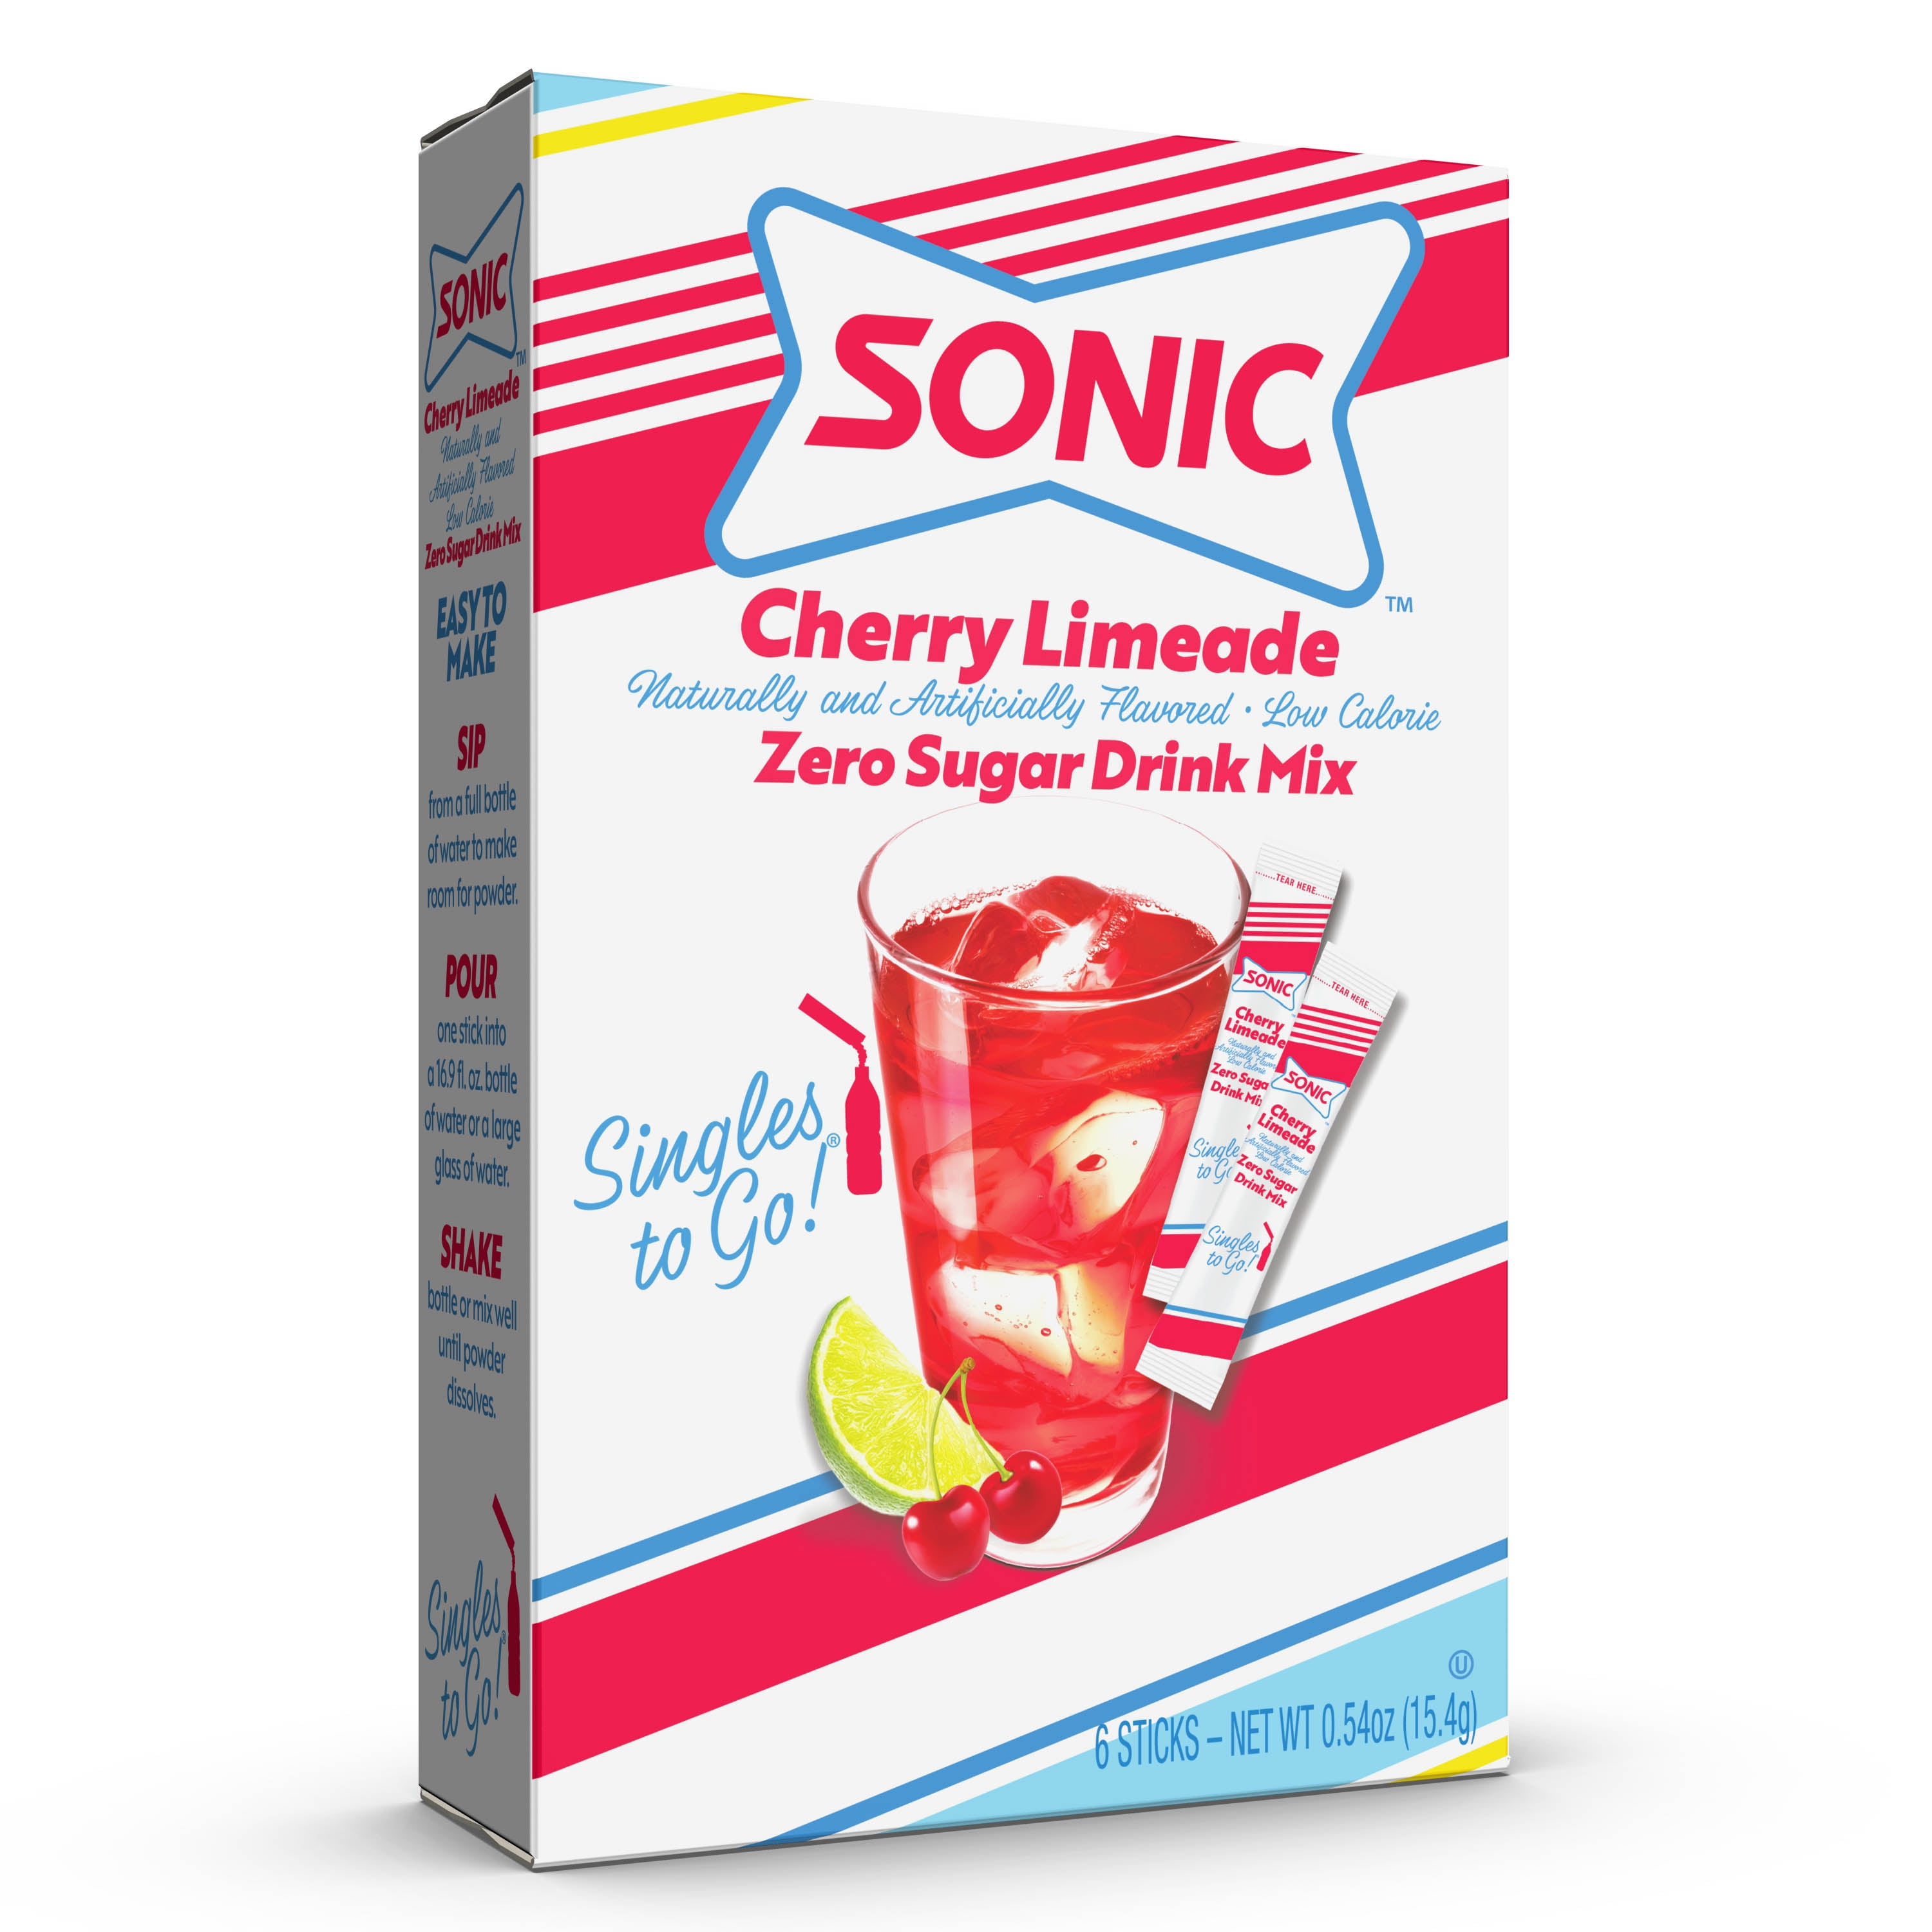 SONIC Pumps It Up With New Cherry Limeade® Flavored Pre-workout